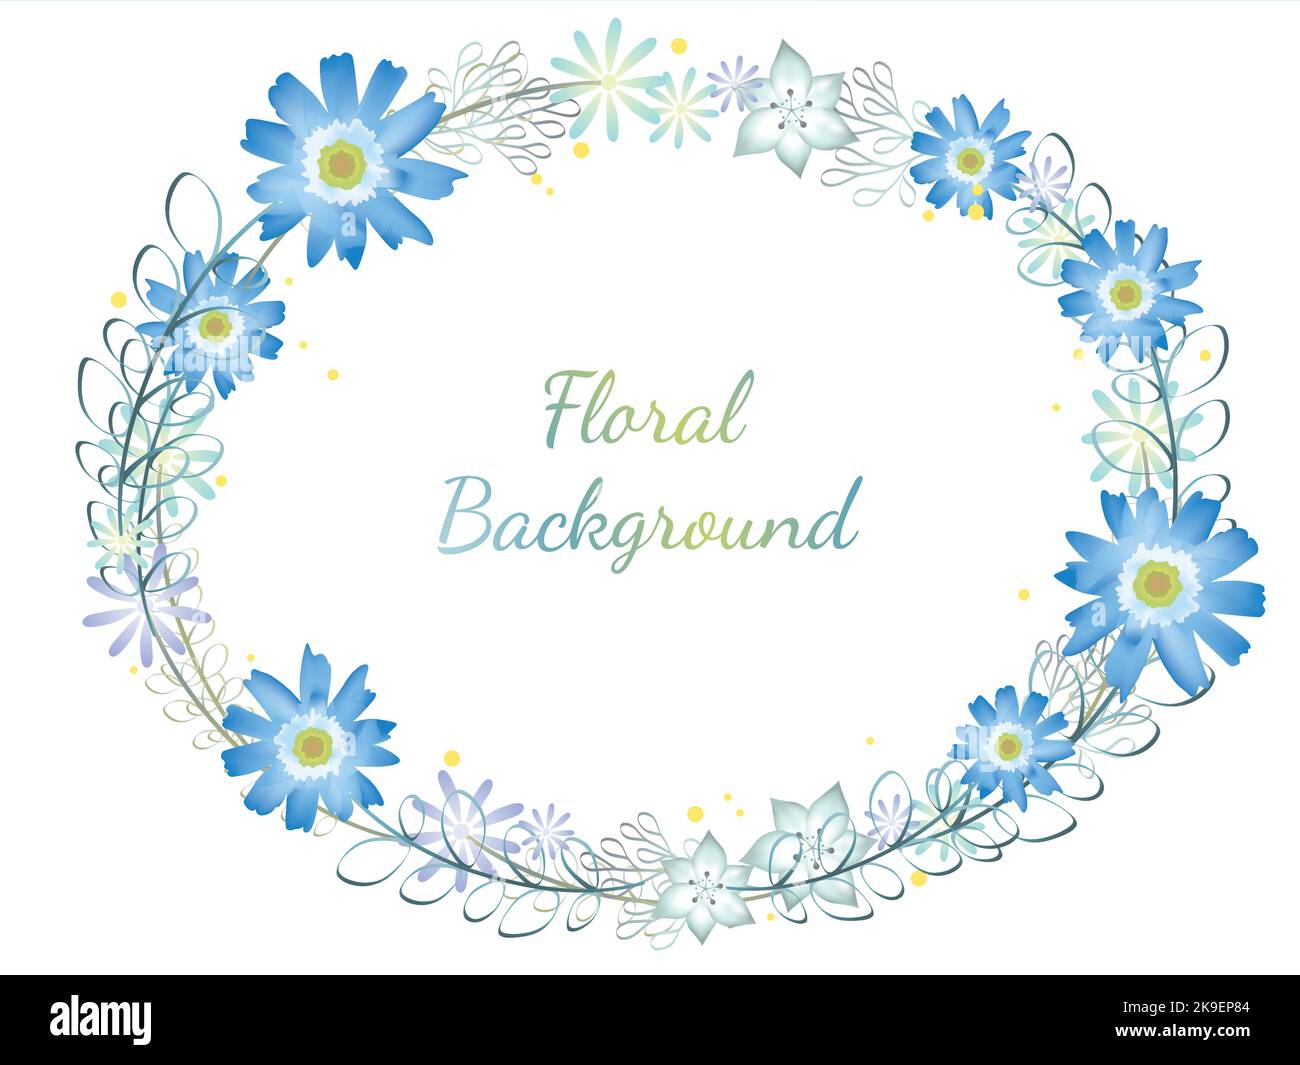 Watercolor blue flower frame with text space isolated on white background, vector illustration. Stock Vector